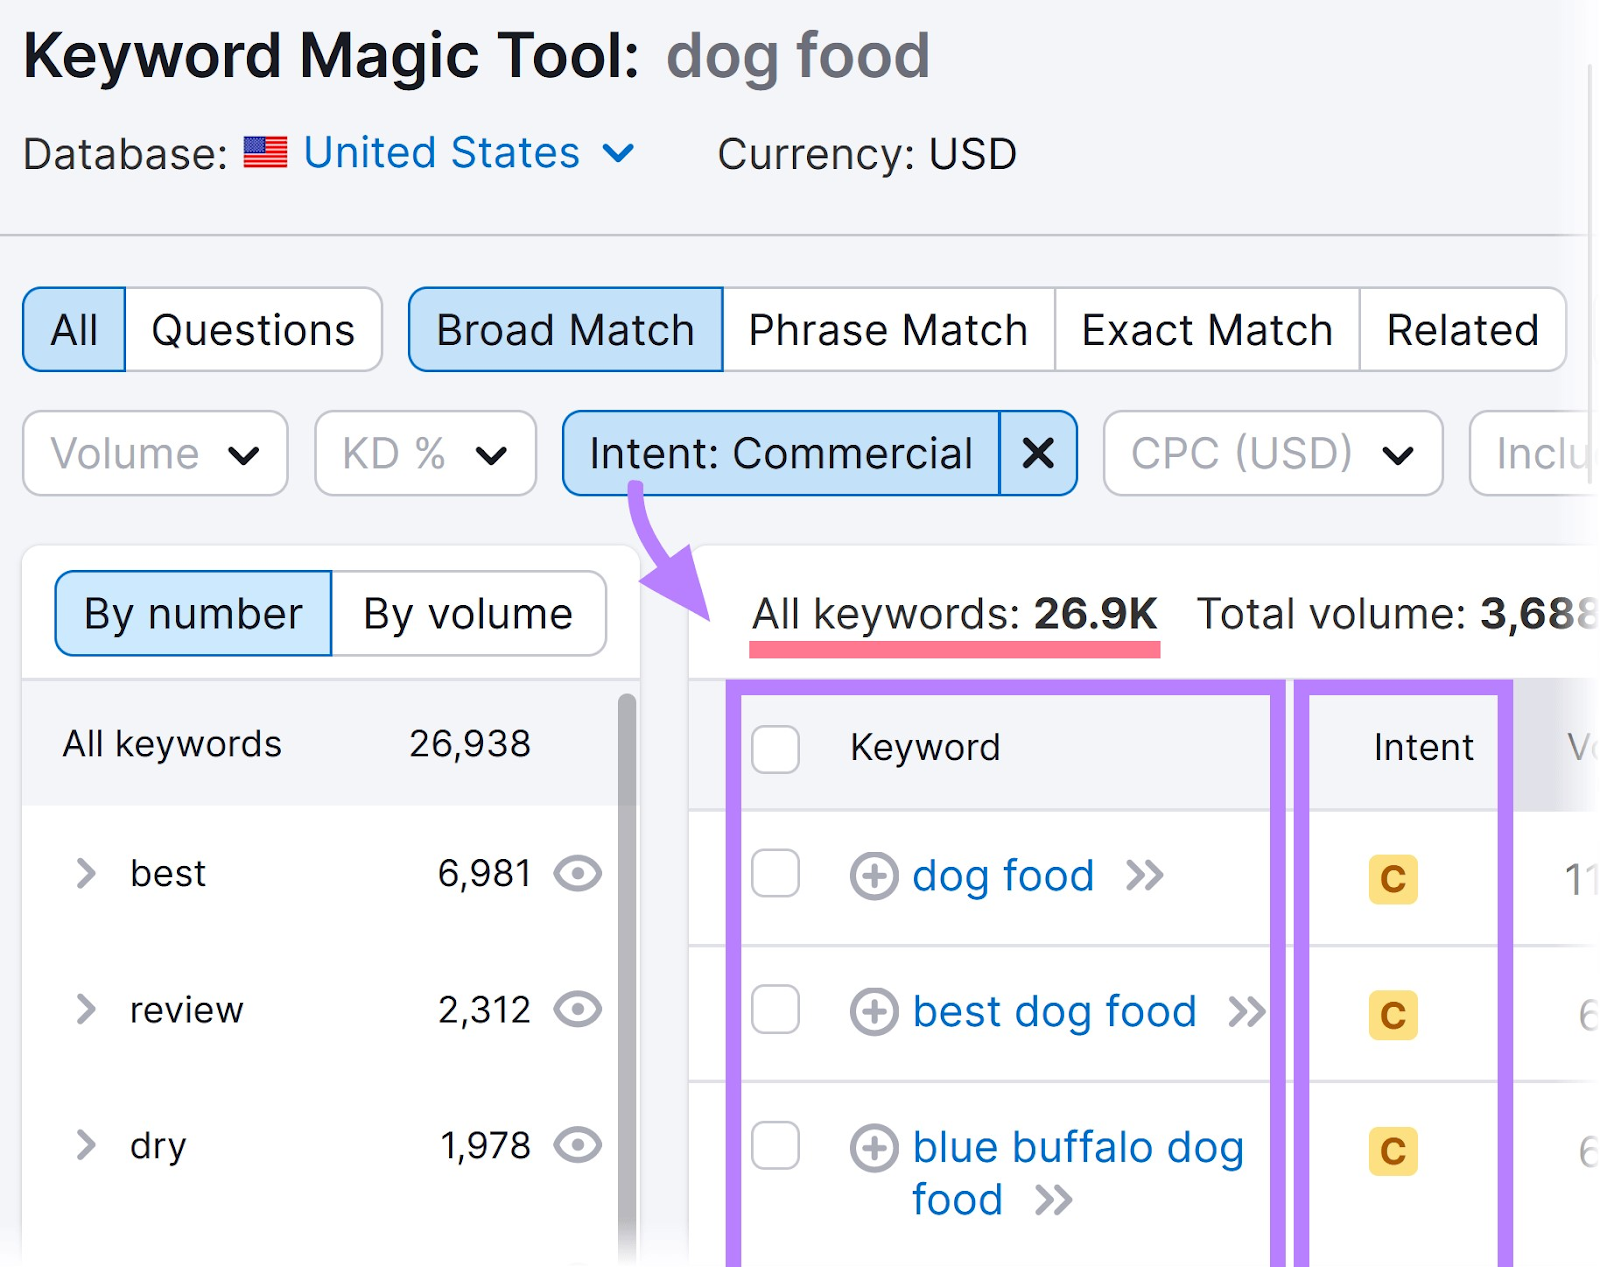 results show 26,9k keywords related to “dog food” that have commercial intent